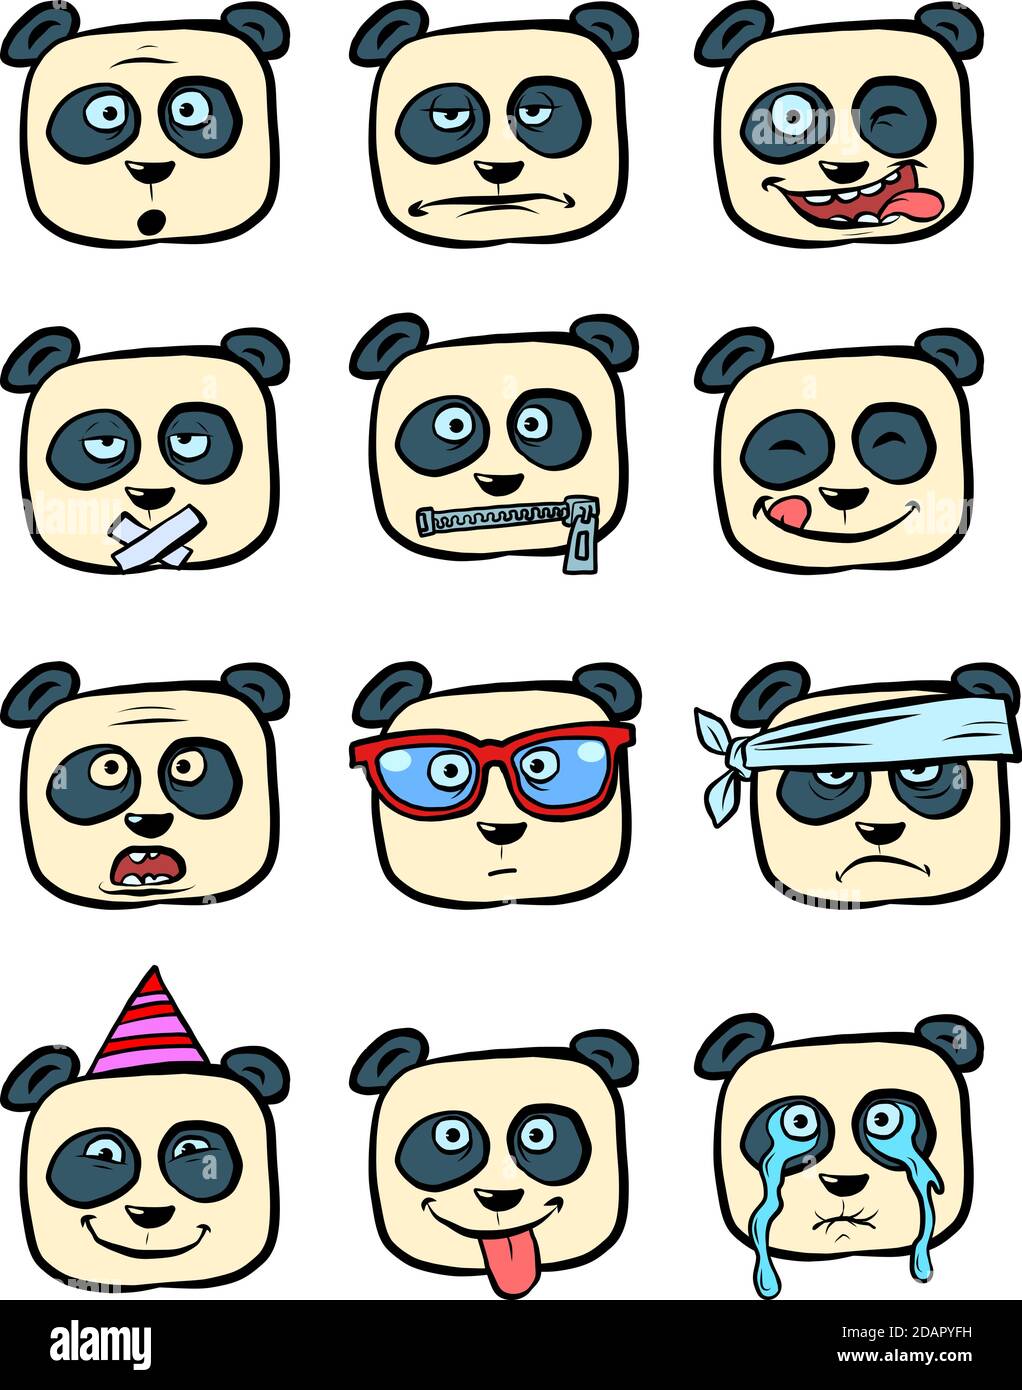 Panda Emoji faces with different emotions collection set character, cute animal Stock Vector